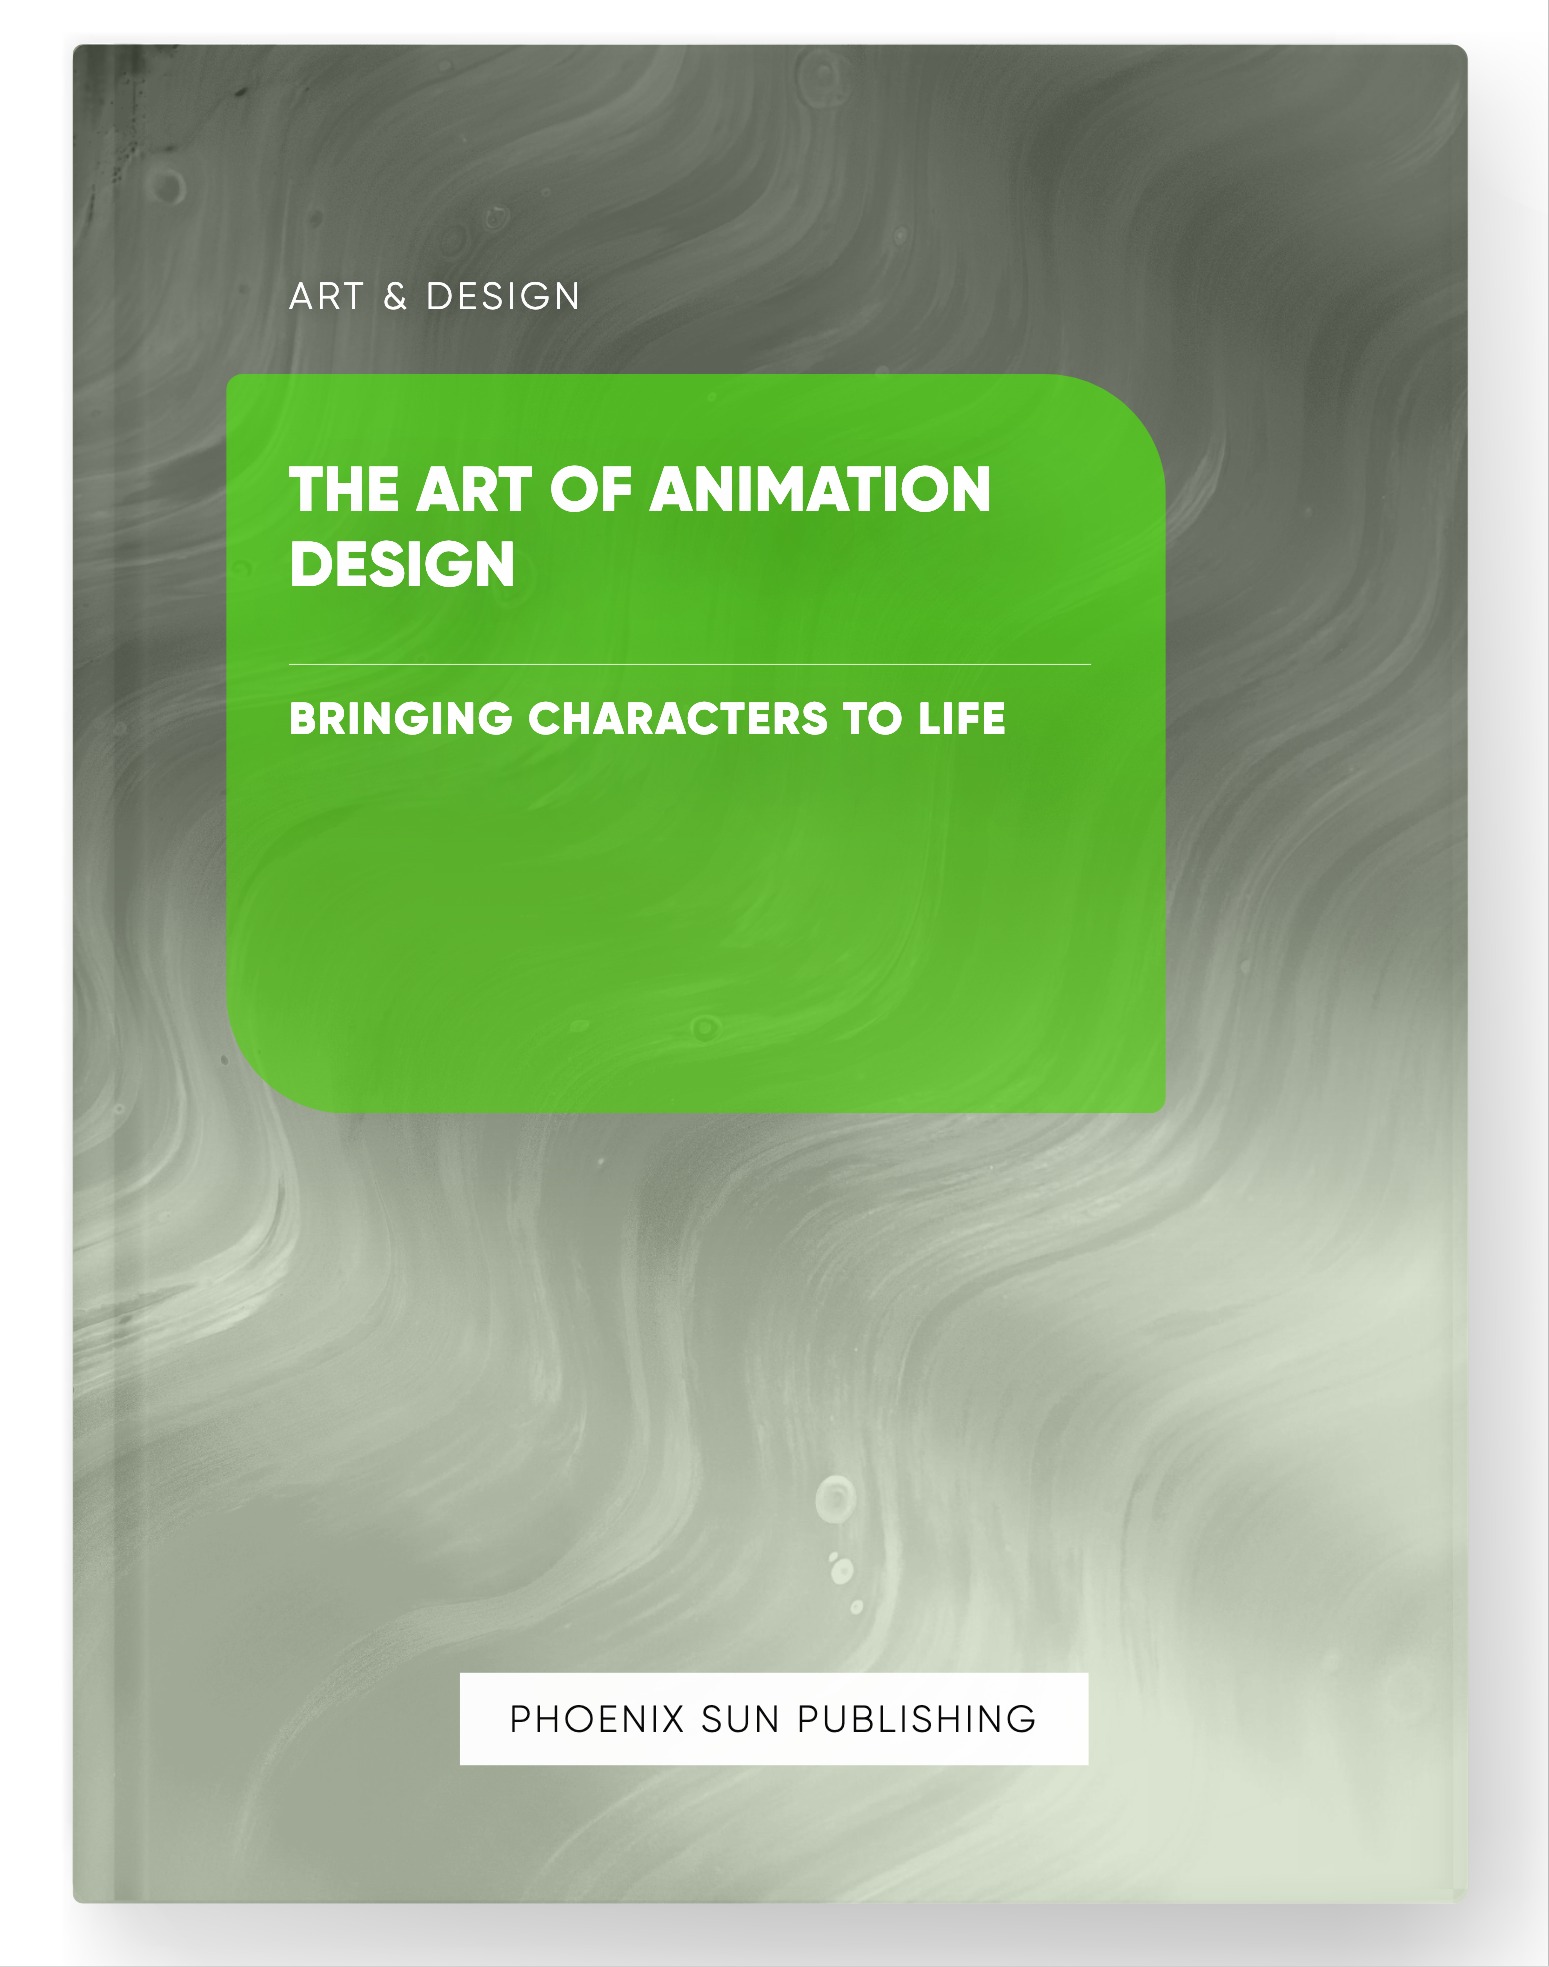 The Art of Animation Design – Bringing Characters to Life